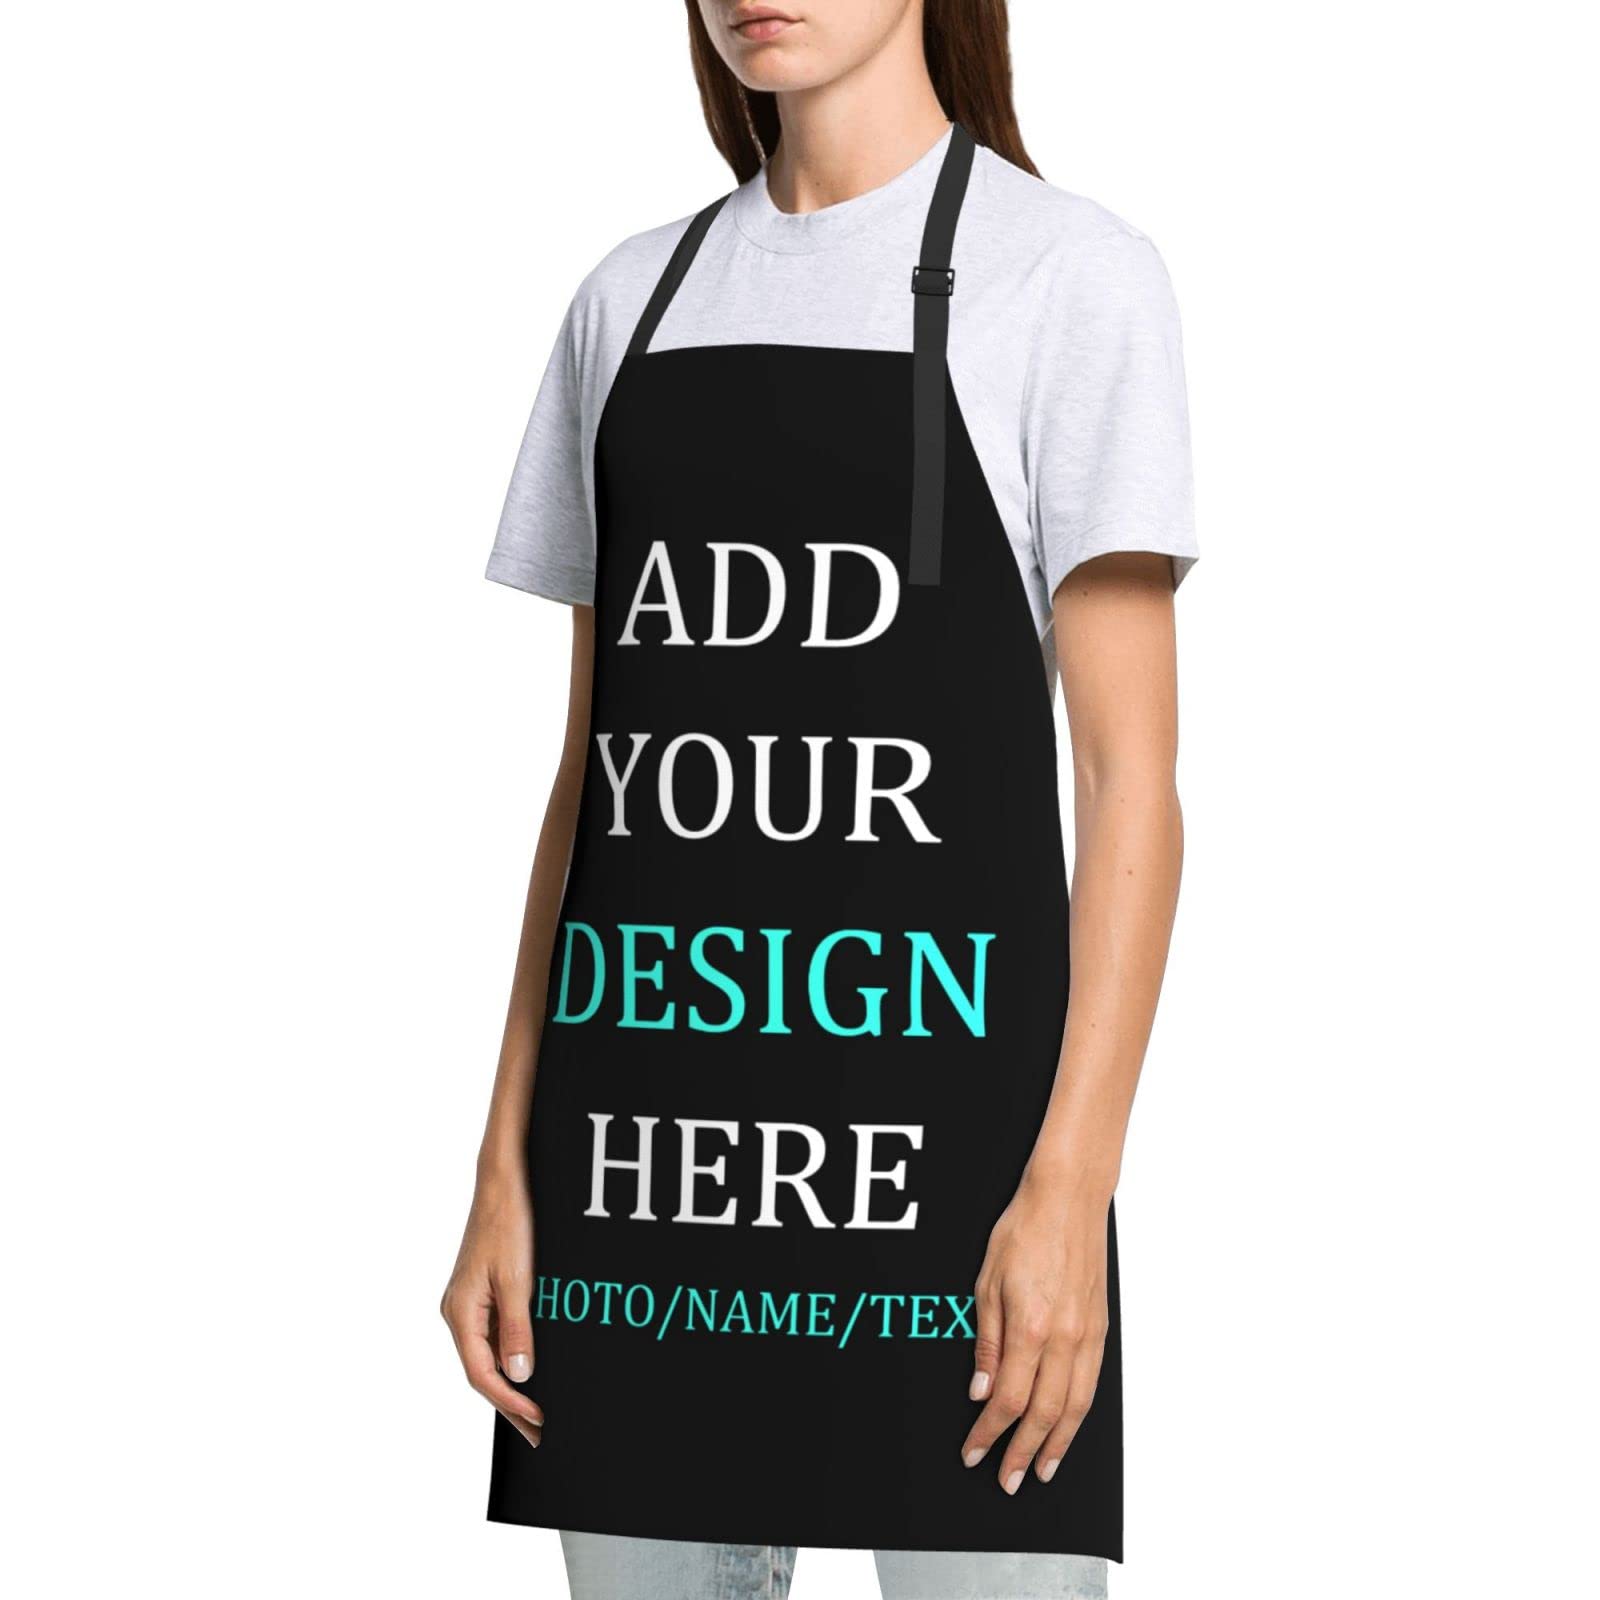 Personalized Apron for Women Custom Add Your Own Name Text Logo Photo Chef Kitchen Aprons Waterproof Cooking Adjustable Tie Apron Great Household Gifts for BBQ Grill Baking Unisex